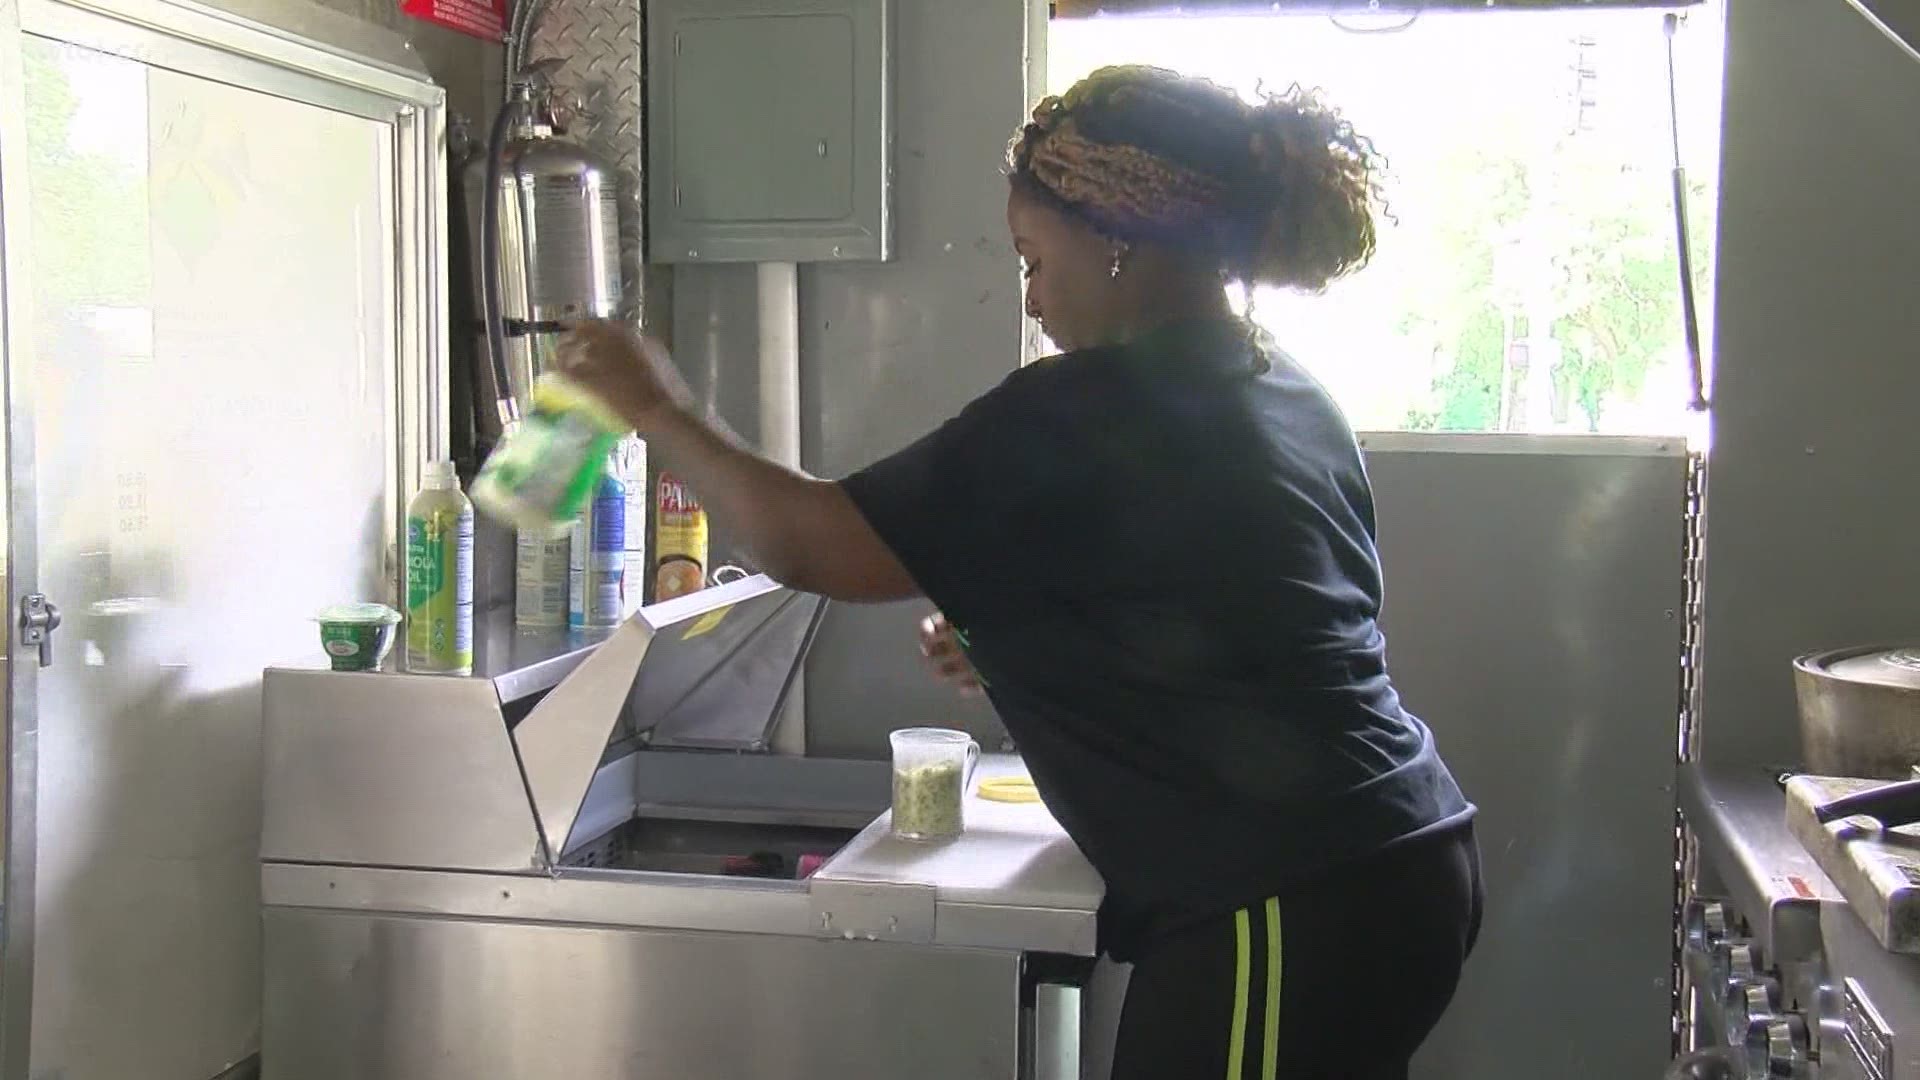 Instead of waiting around for an unemployment check, Cutie Service got to work with the skills she already had, opening Cutie's Carribean food truck.